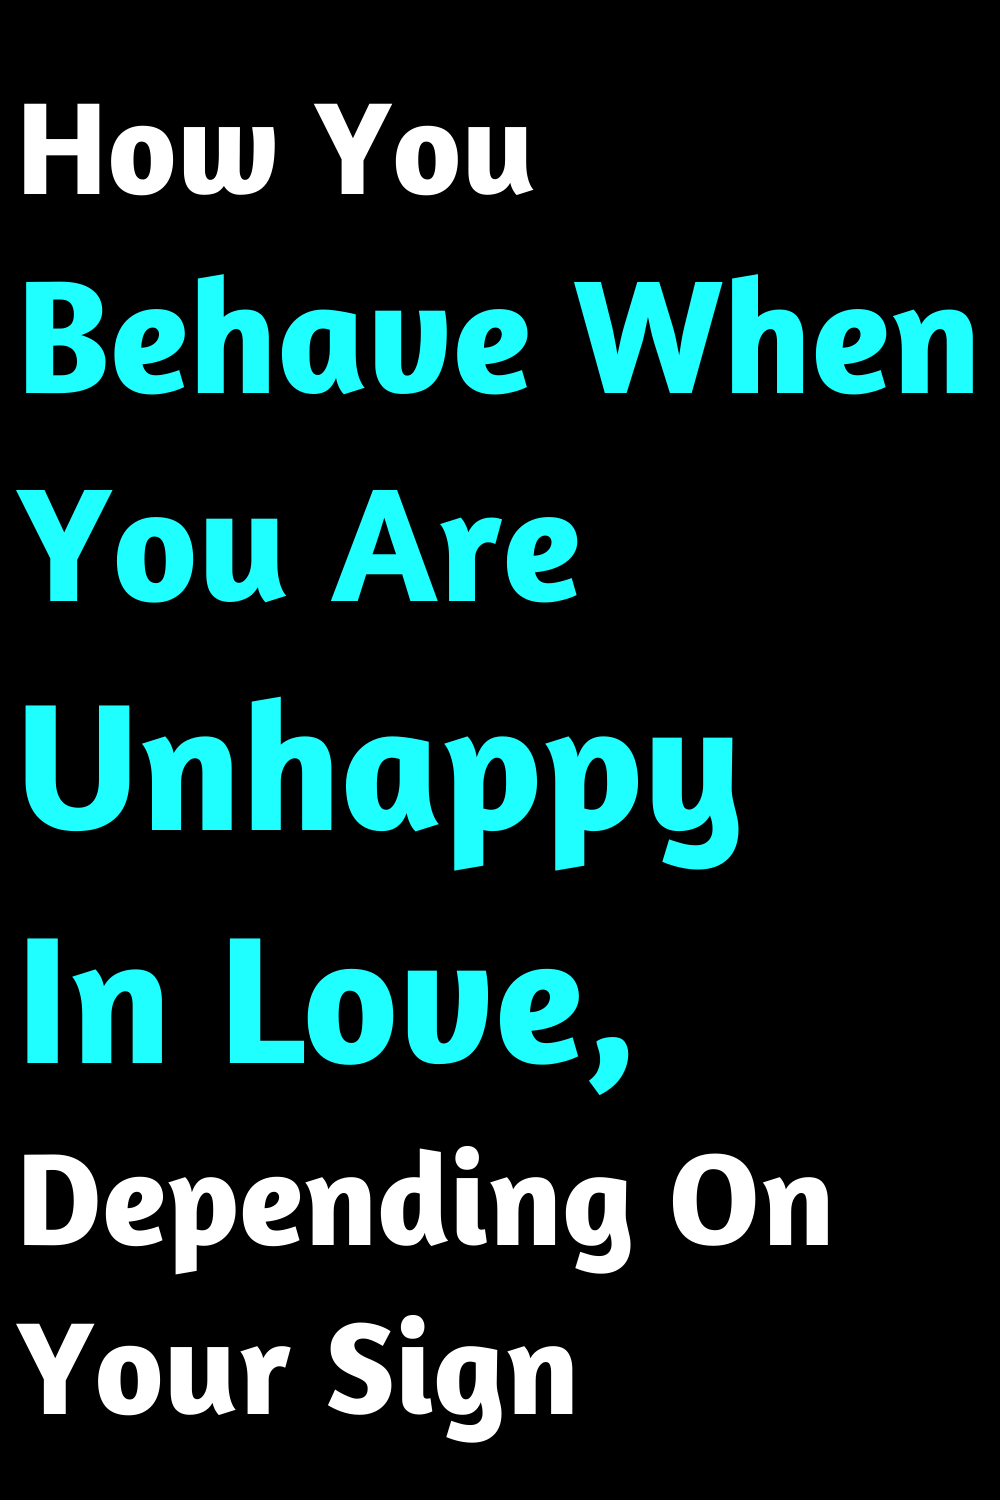 How You Behave When You Are Unhappy In Love, Depending On Your Sign